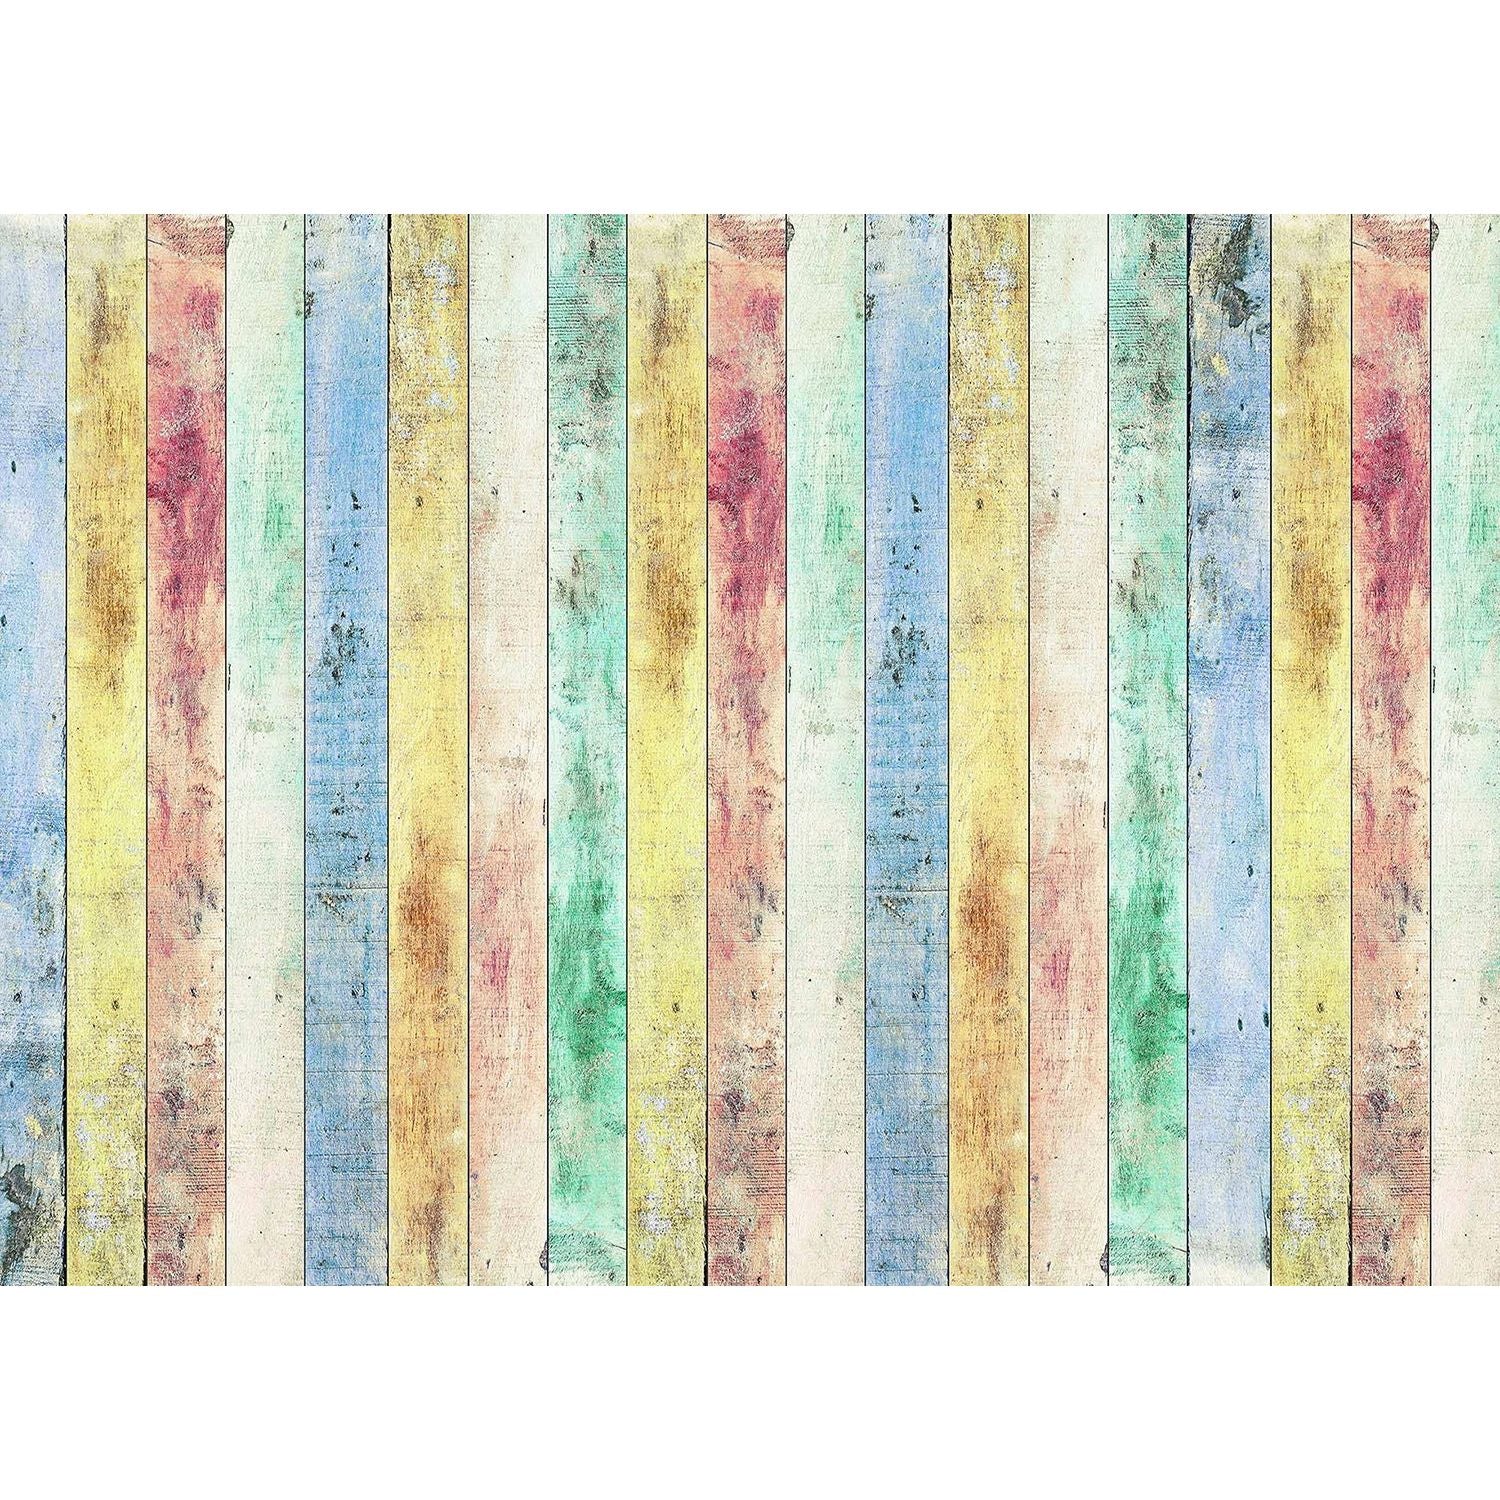 Rustic Rainbow: Distressed Wooden Planks Wall Mural